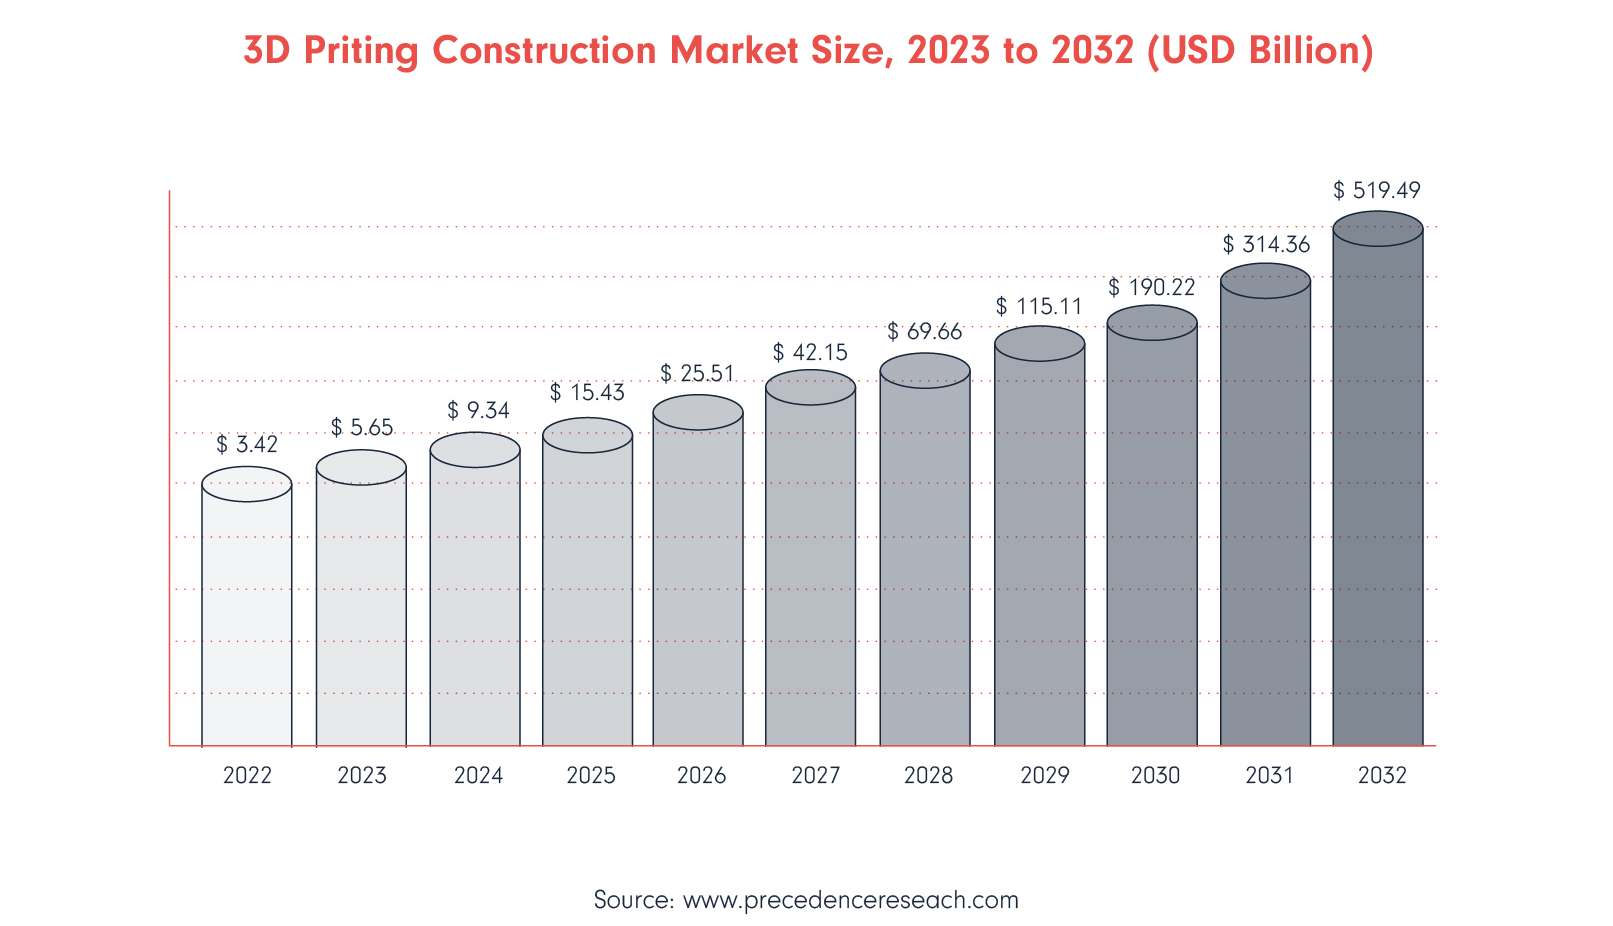 Bar chart of 3D printing construction market size for the next decade